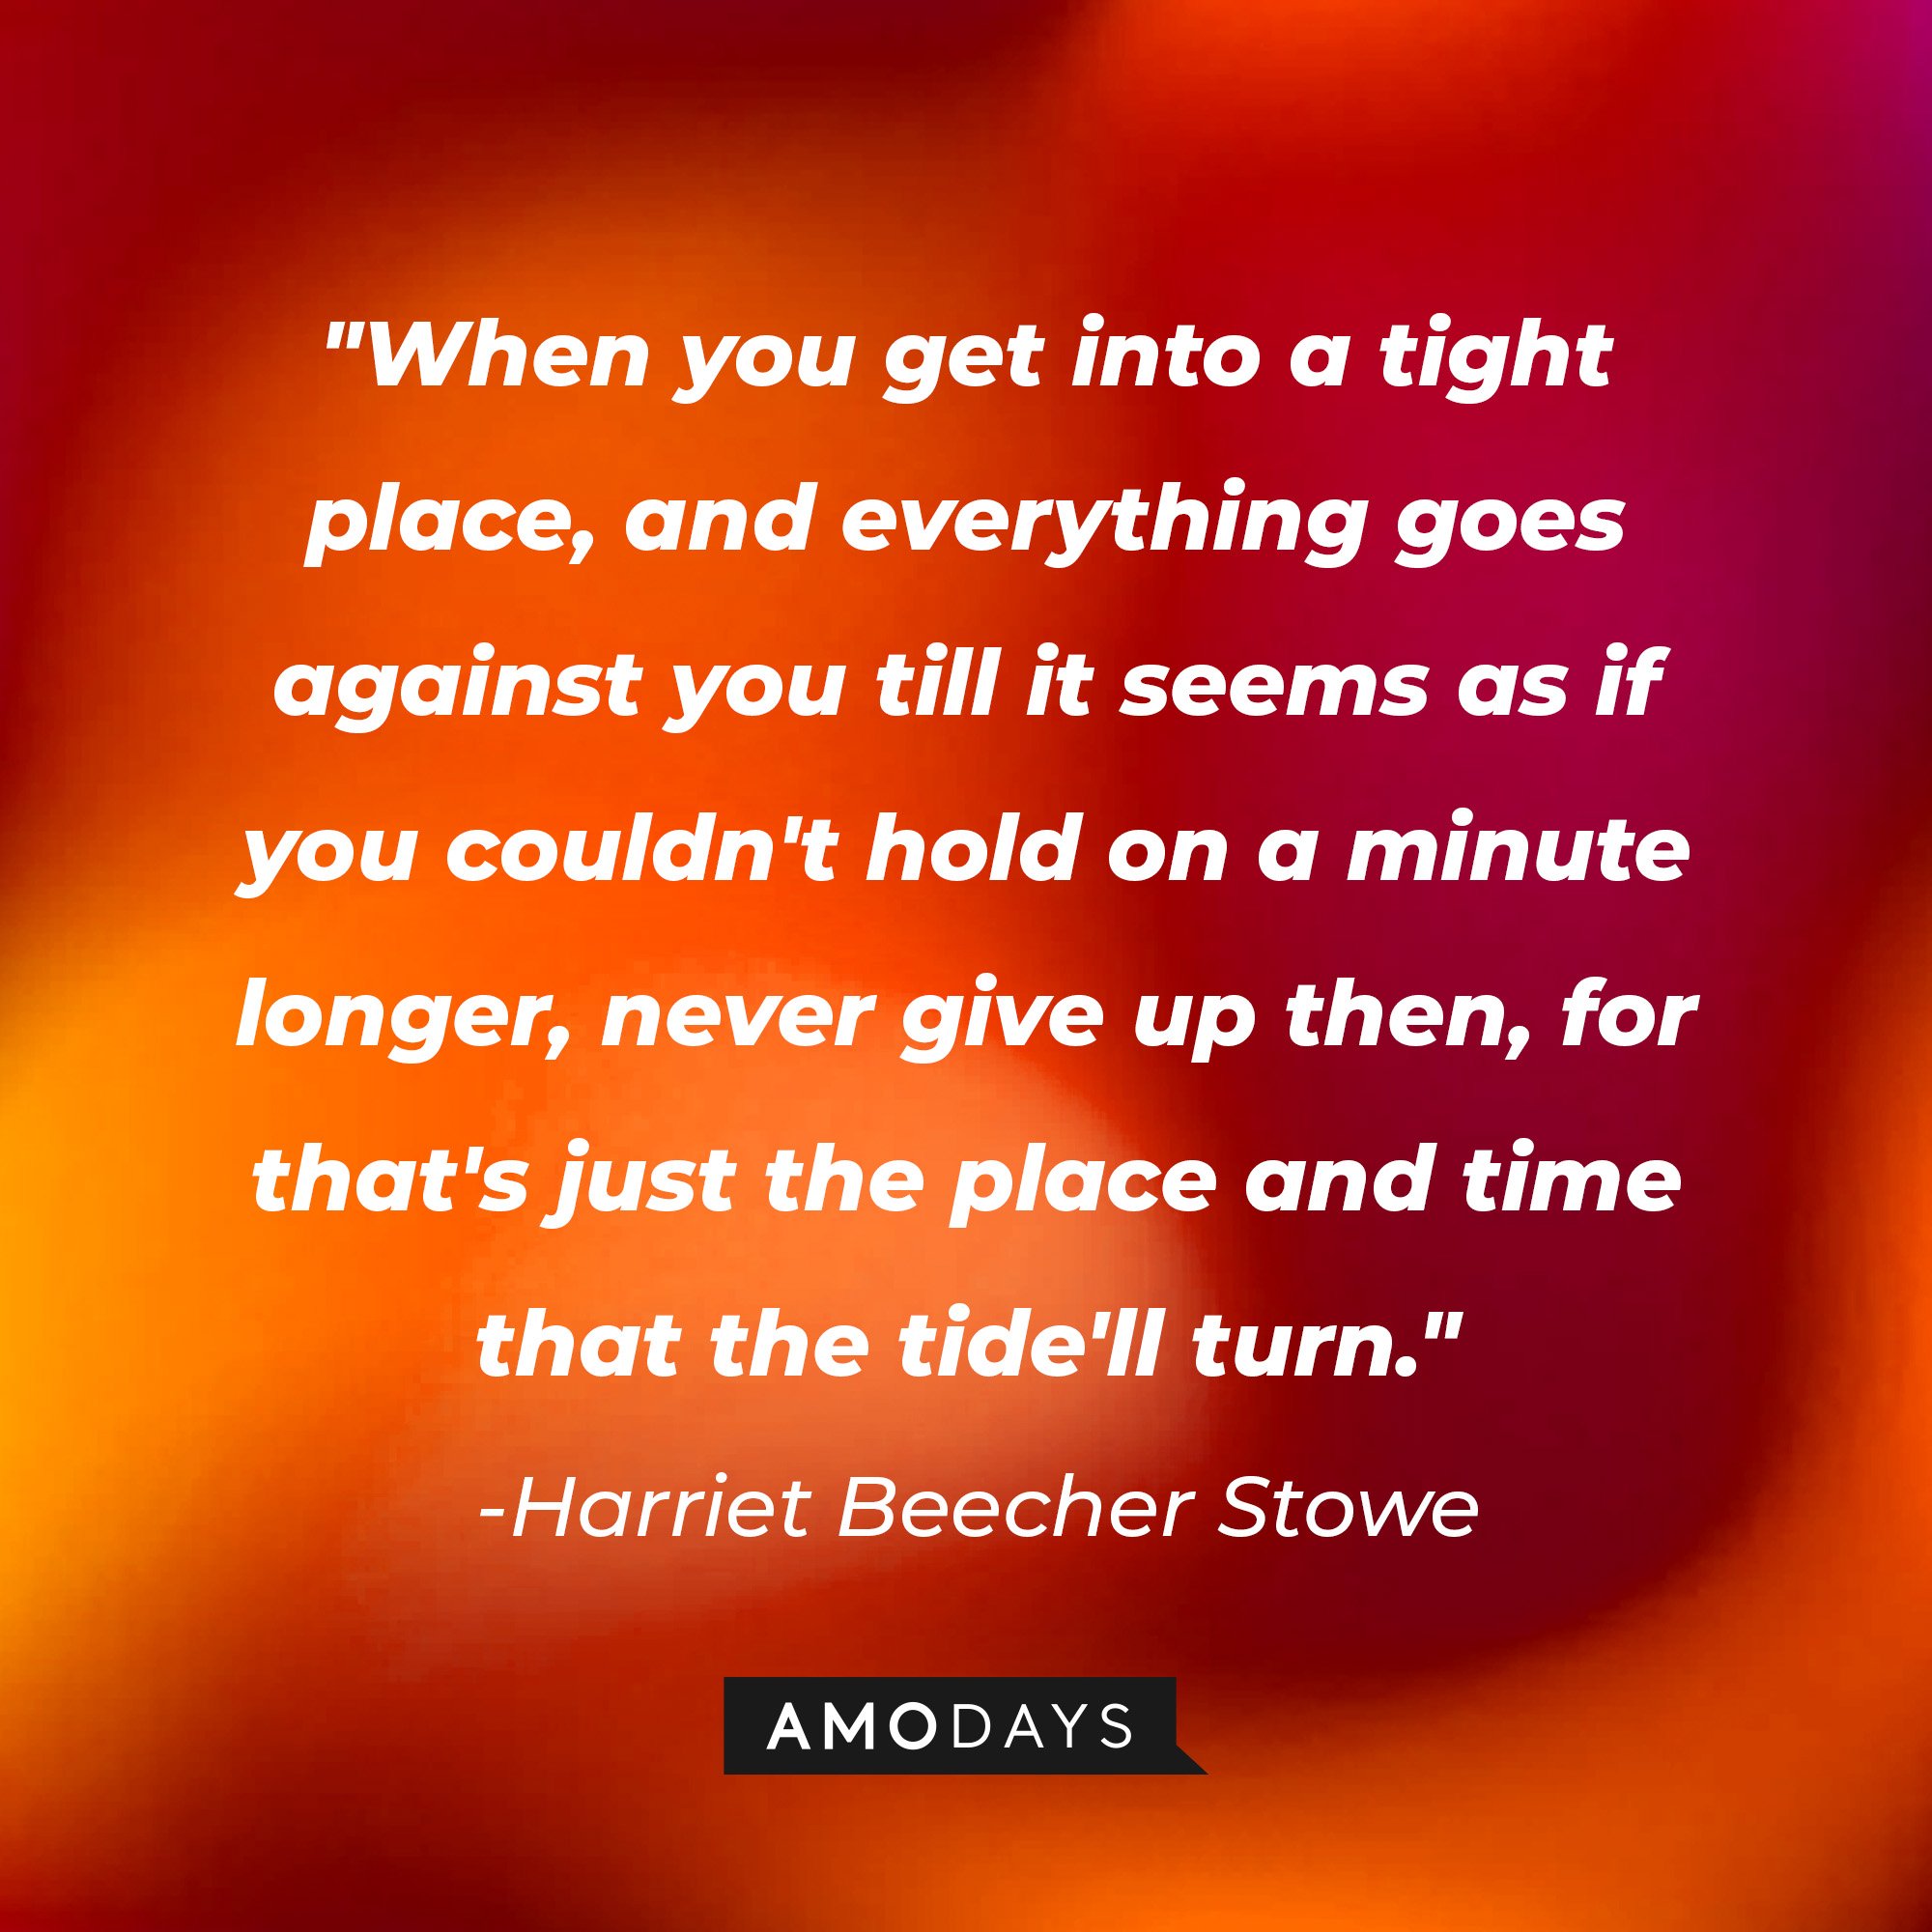  Harriet Beecher Stowe’s quote: "I made two decisions in my life based on fear, and they cost me everything." |Image: AmoDays